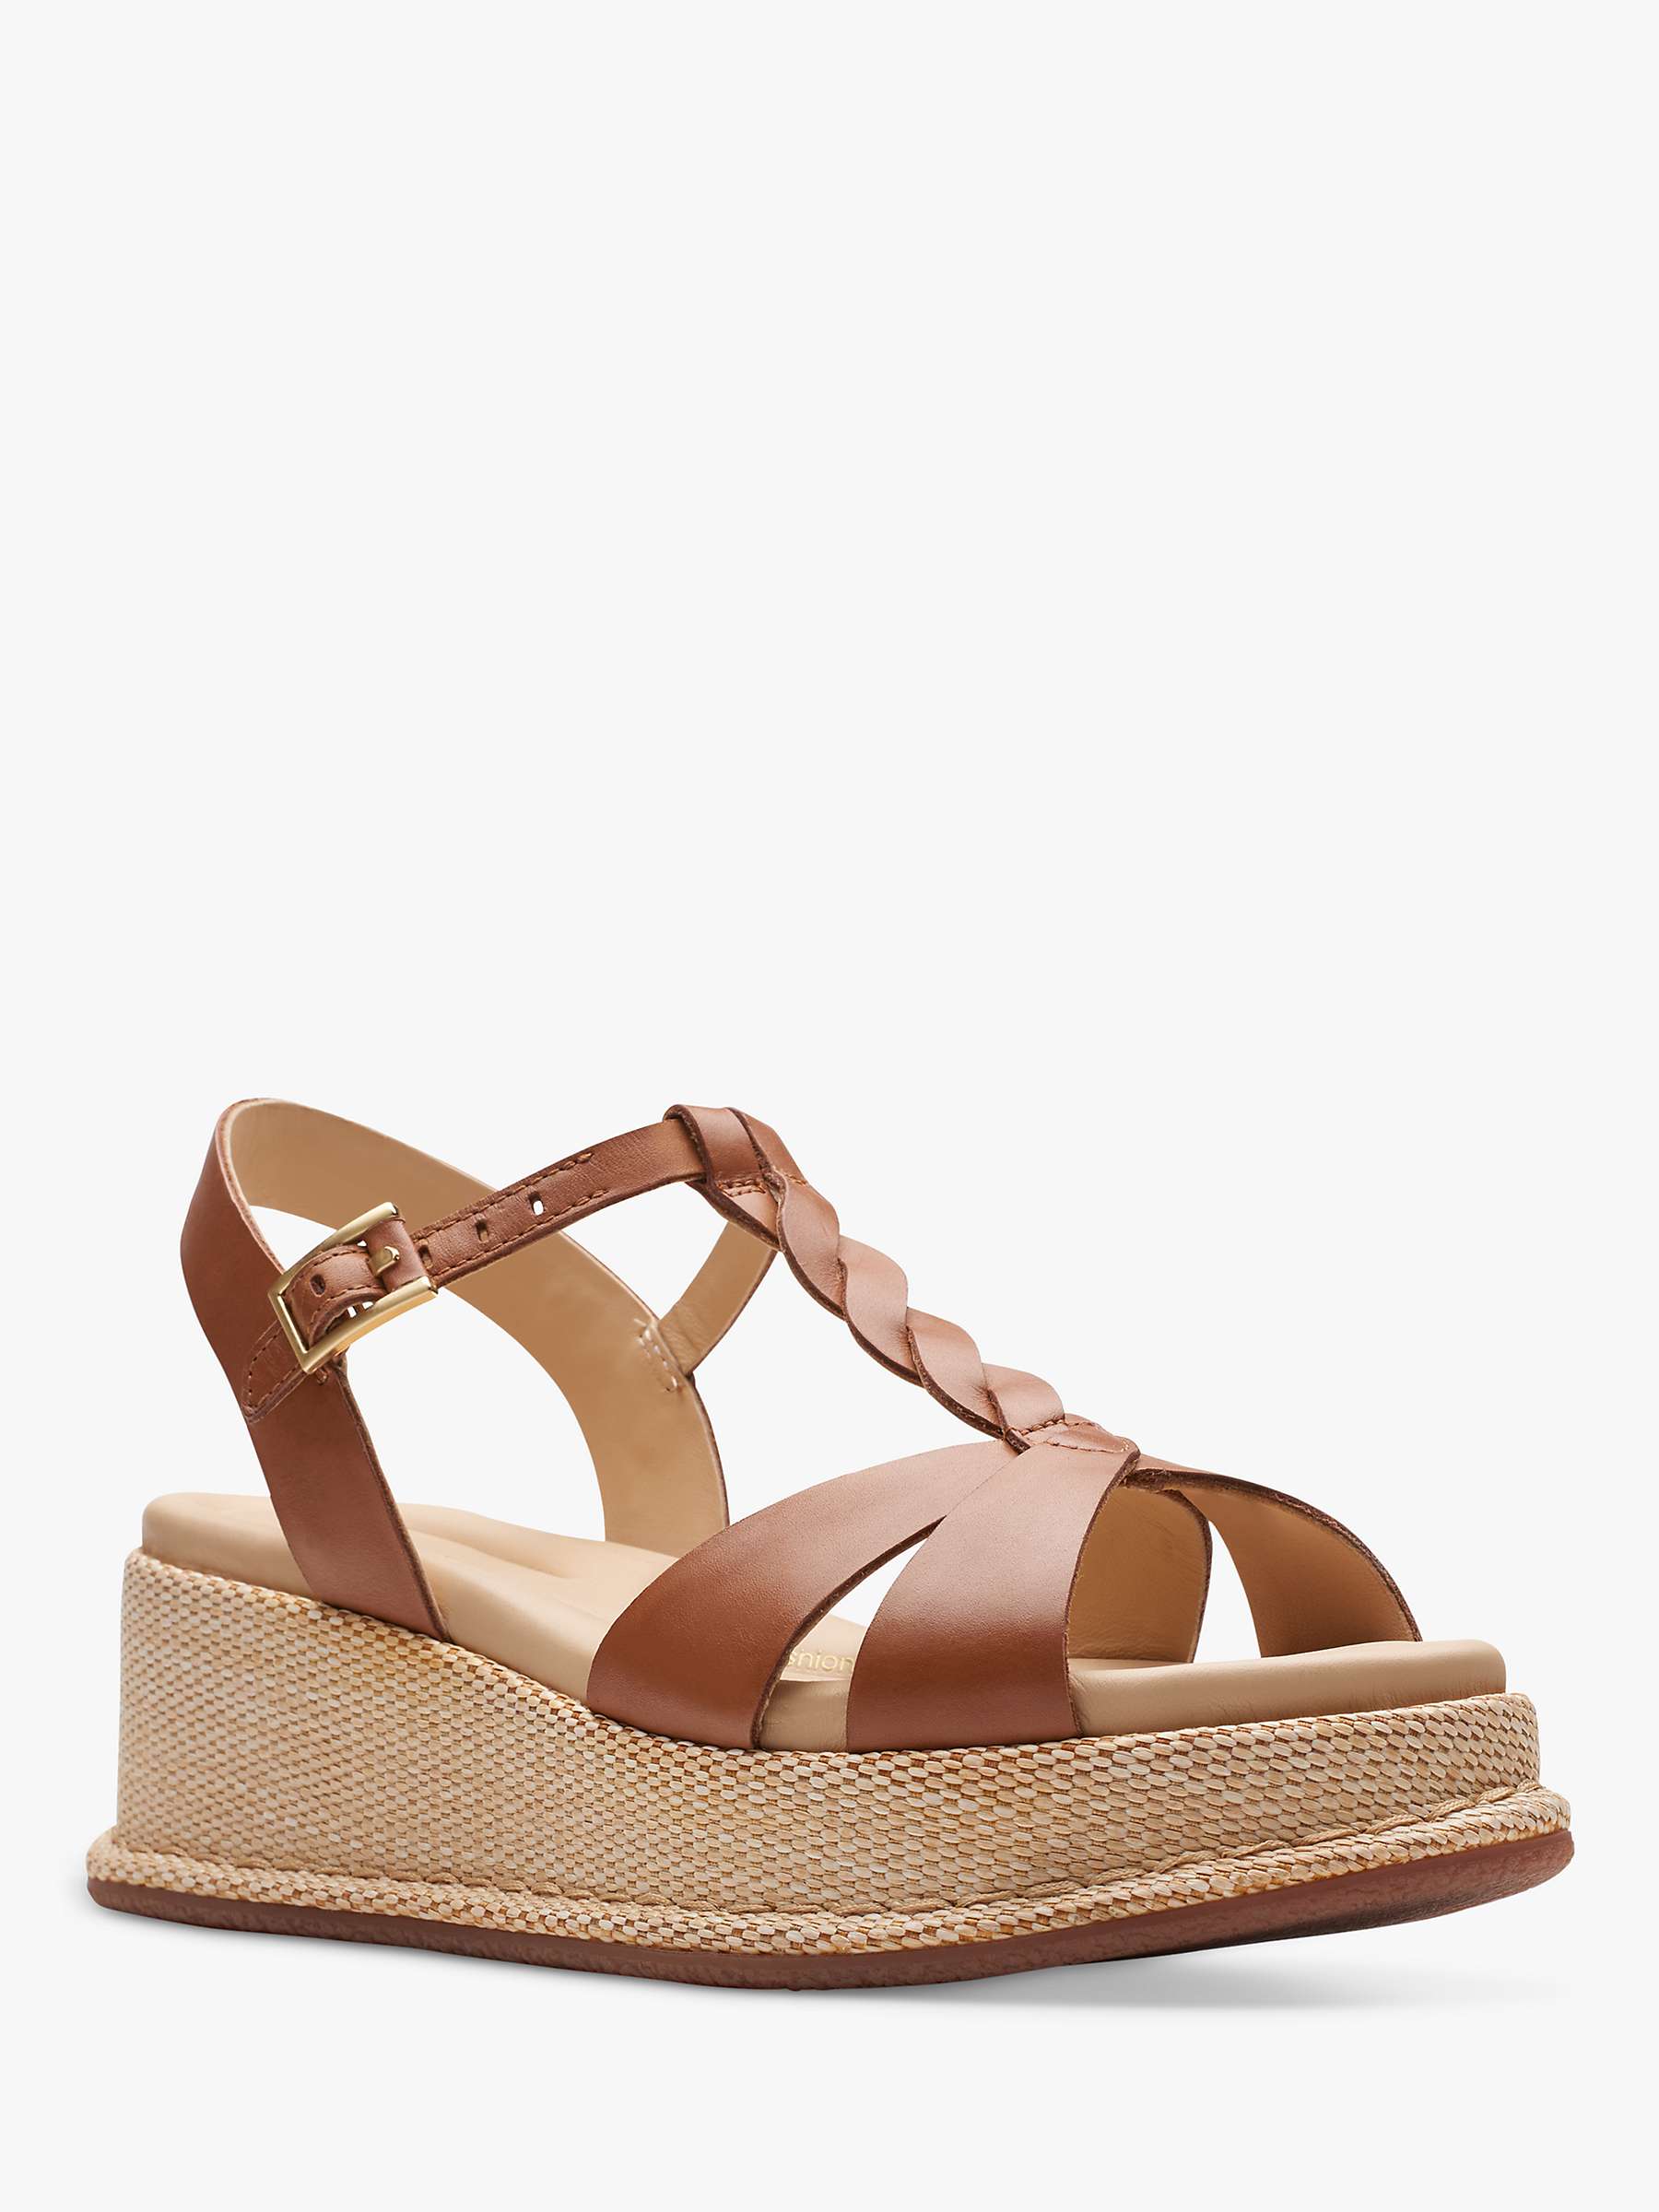 Buy Clarks Kimmei Twist Leather Wedge Sandals Online at johnlewis.com